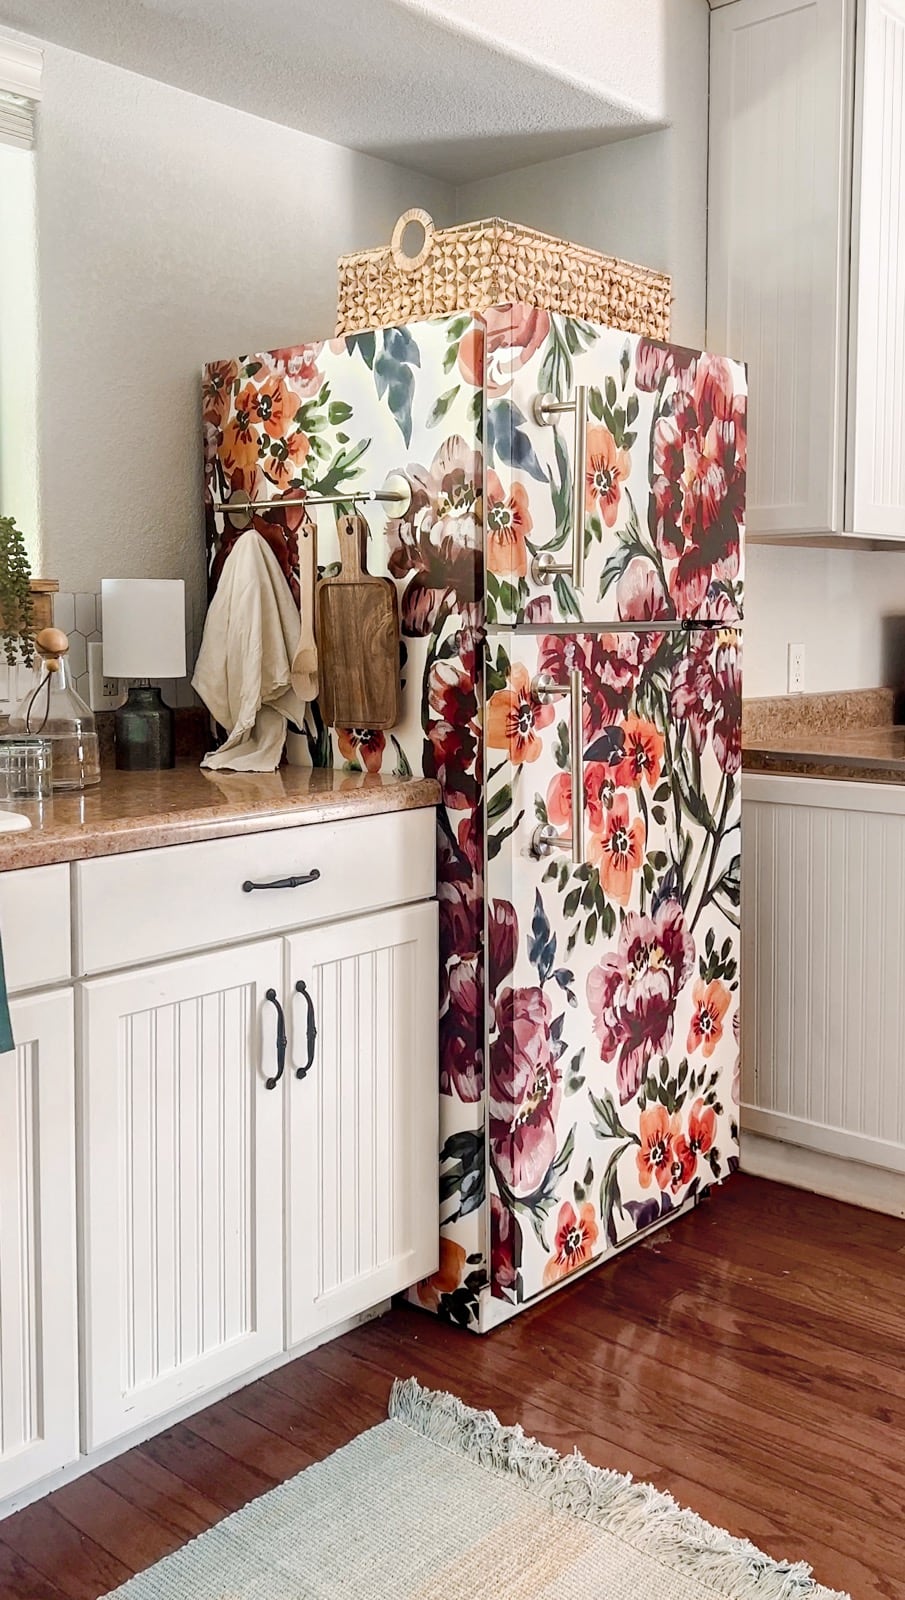 Ugly, outdated or mismatched fridge? Learn how to cover a refrigerator with removable wallpaper to change the look in just a couple of hours. It's such an easy process with a stunning after effect!